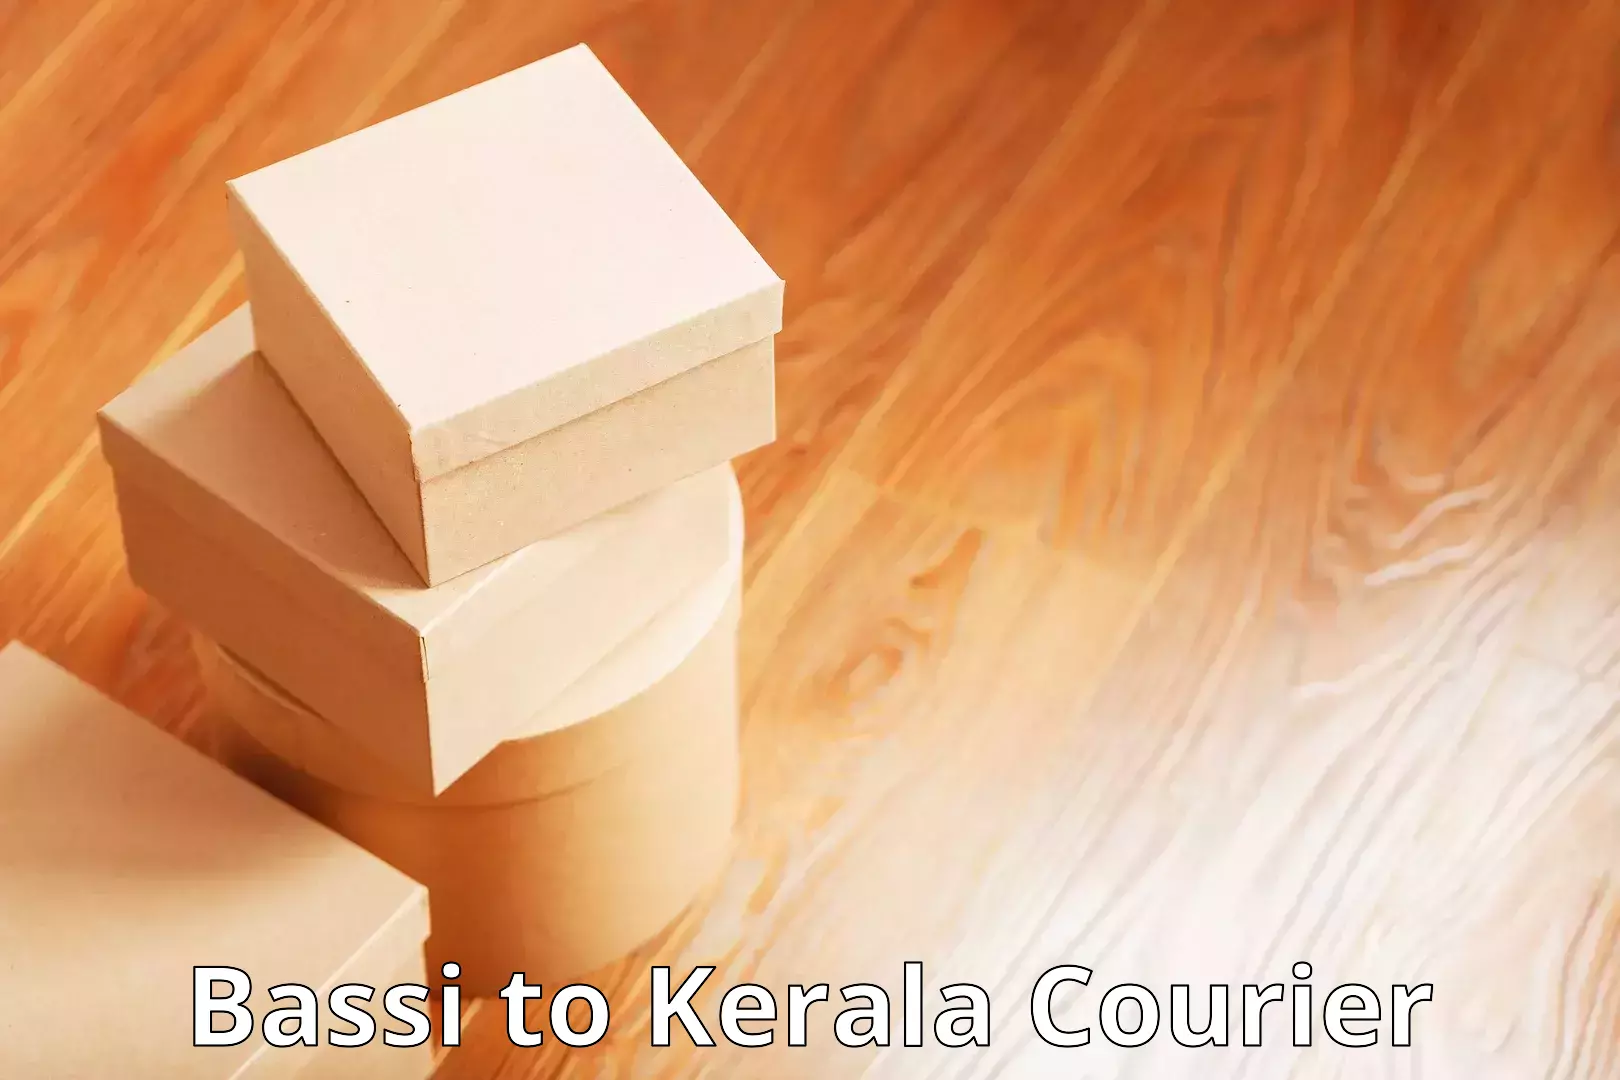 Sustainable delivery practices Bassi to Kerala